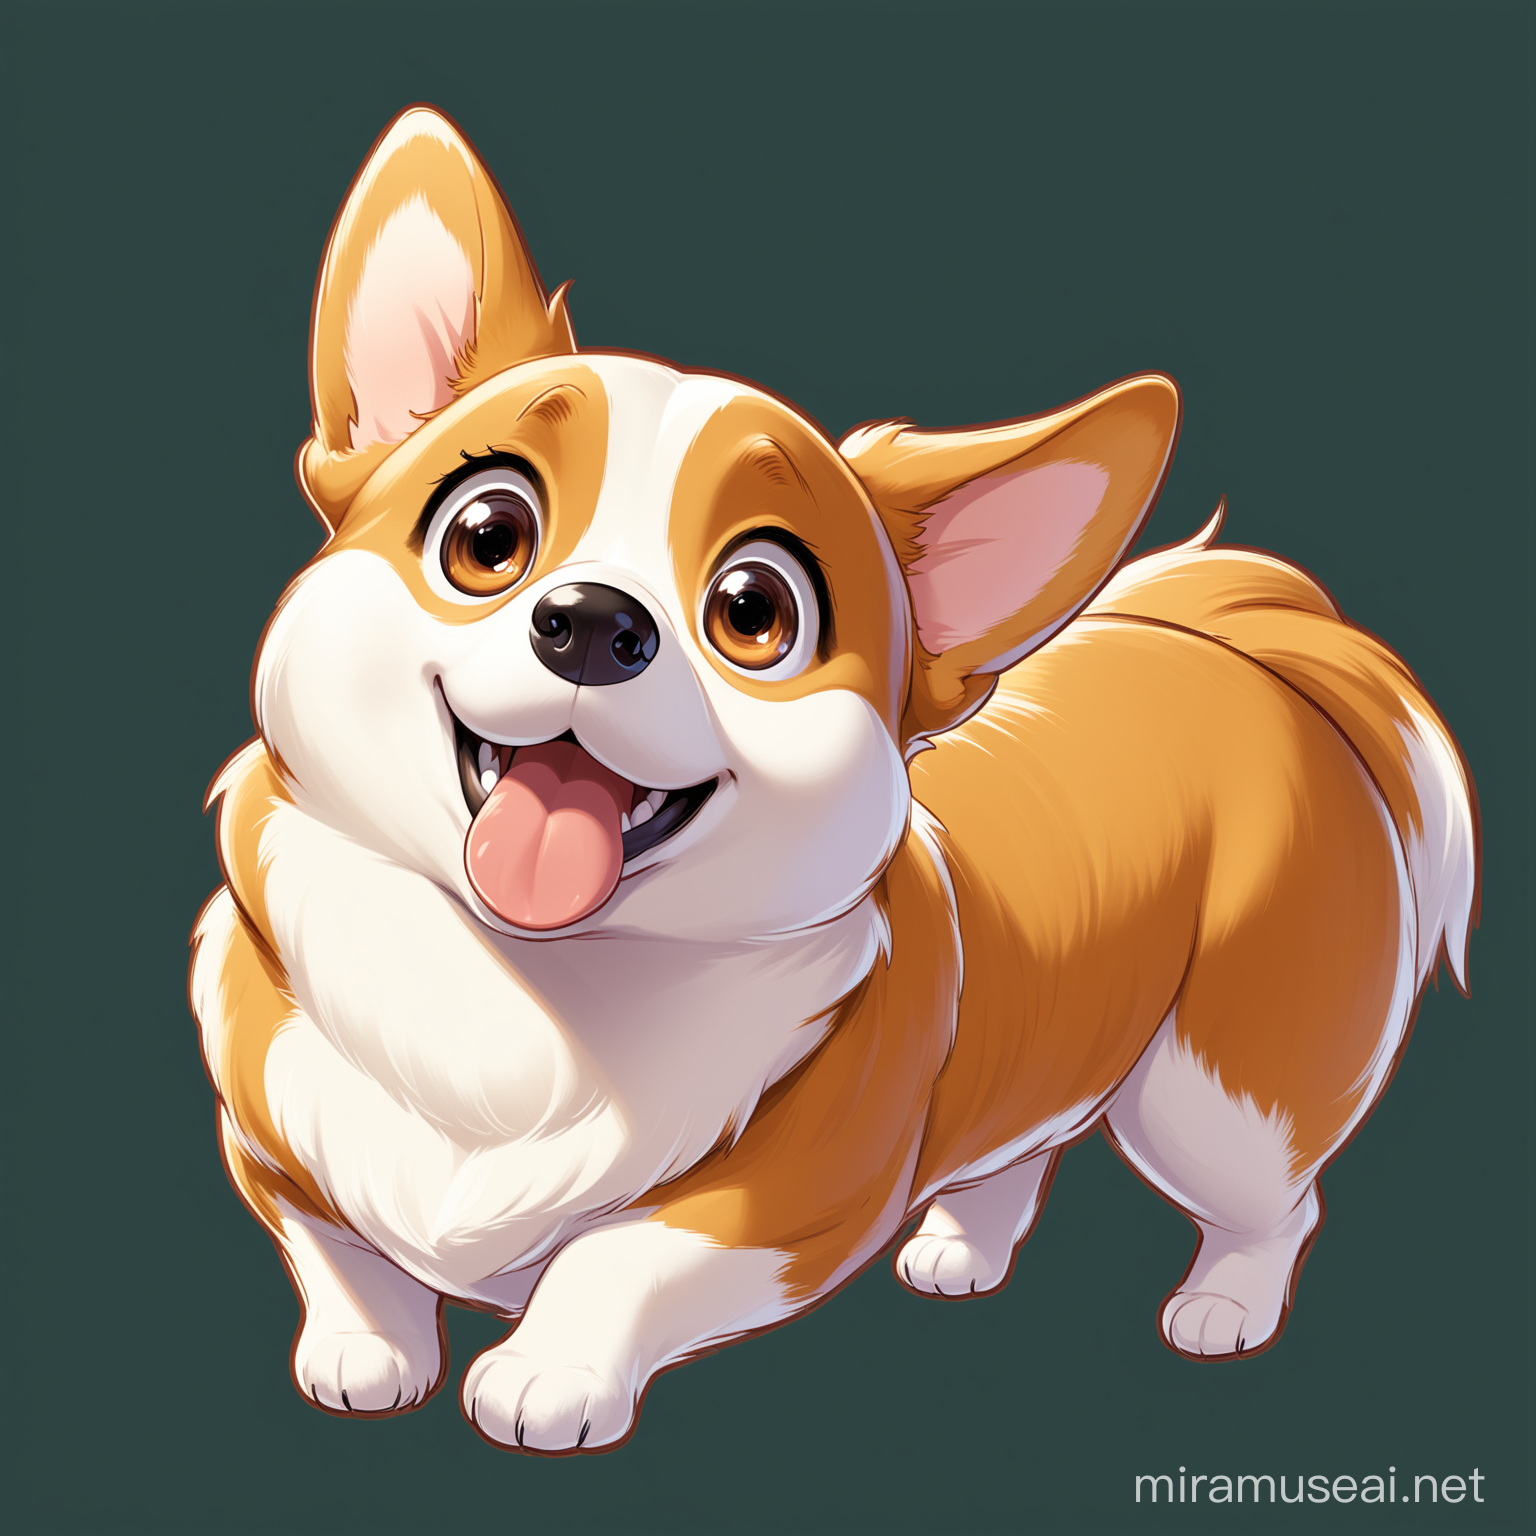 Surprised Cartoon Pembroke Welsh Corgi with Large Eyes and Open Mouth